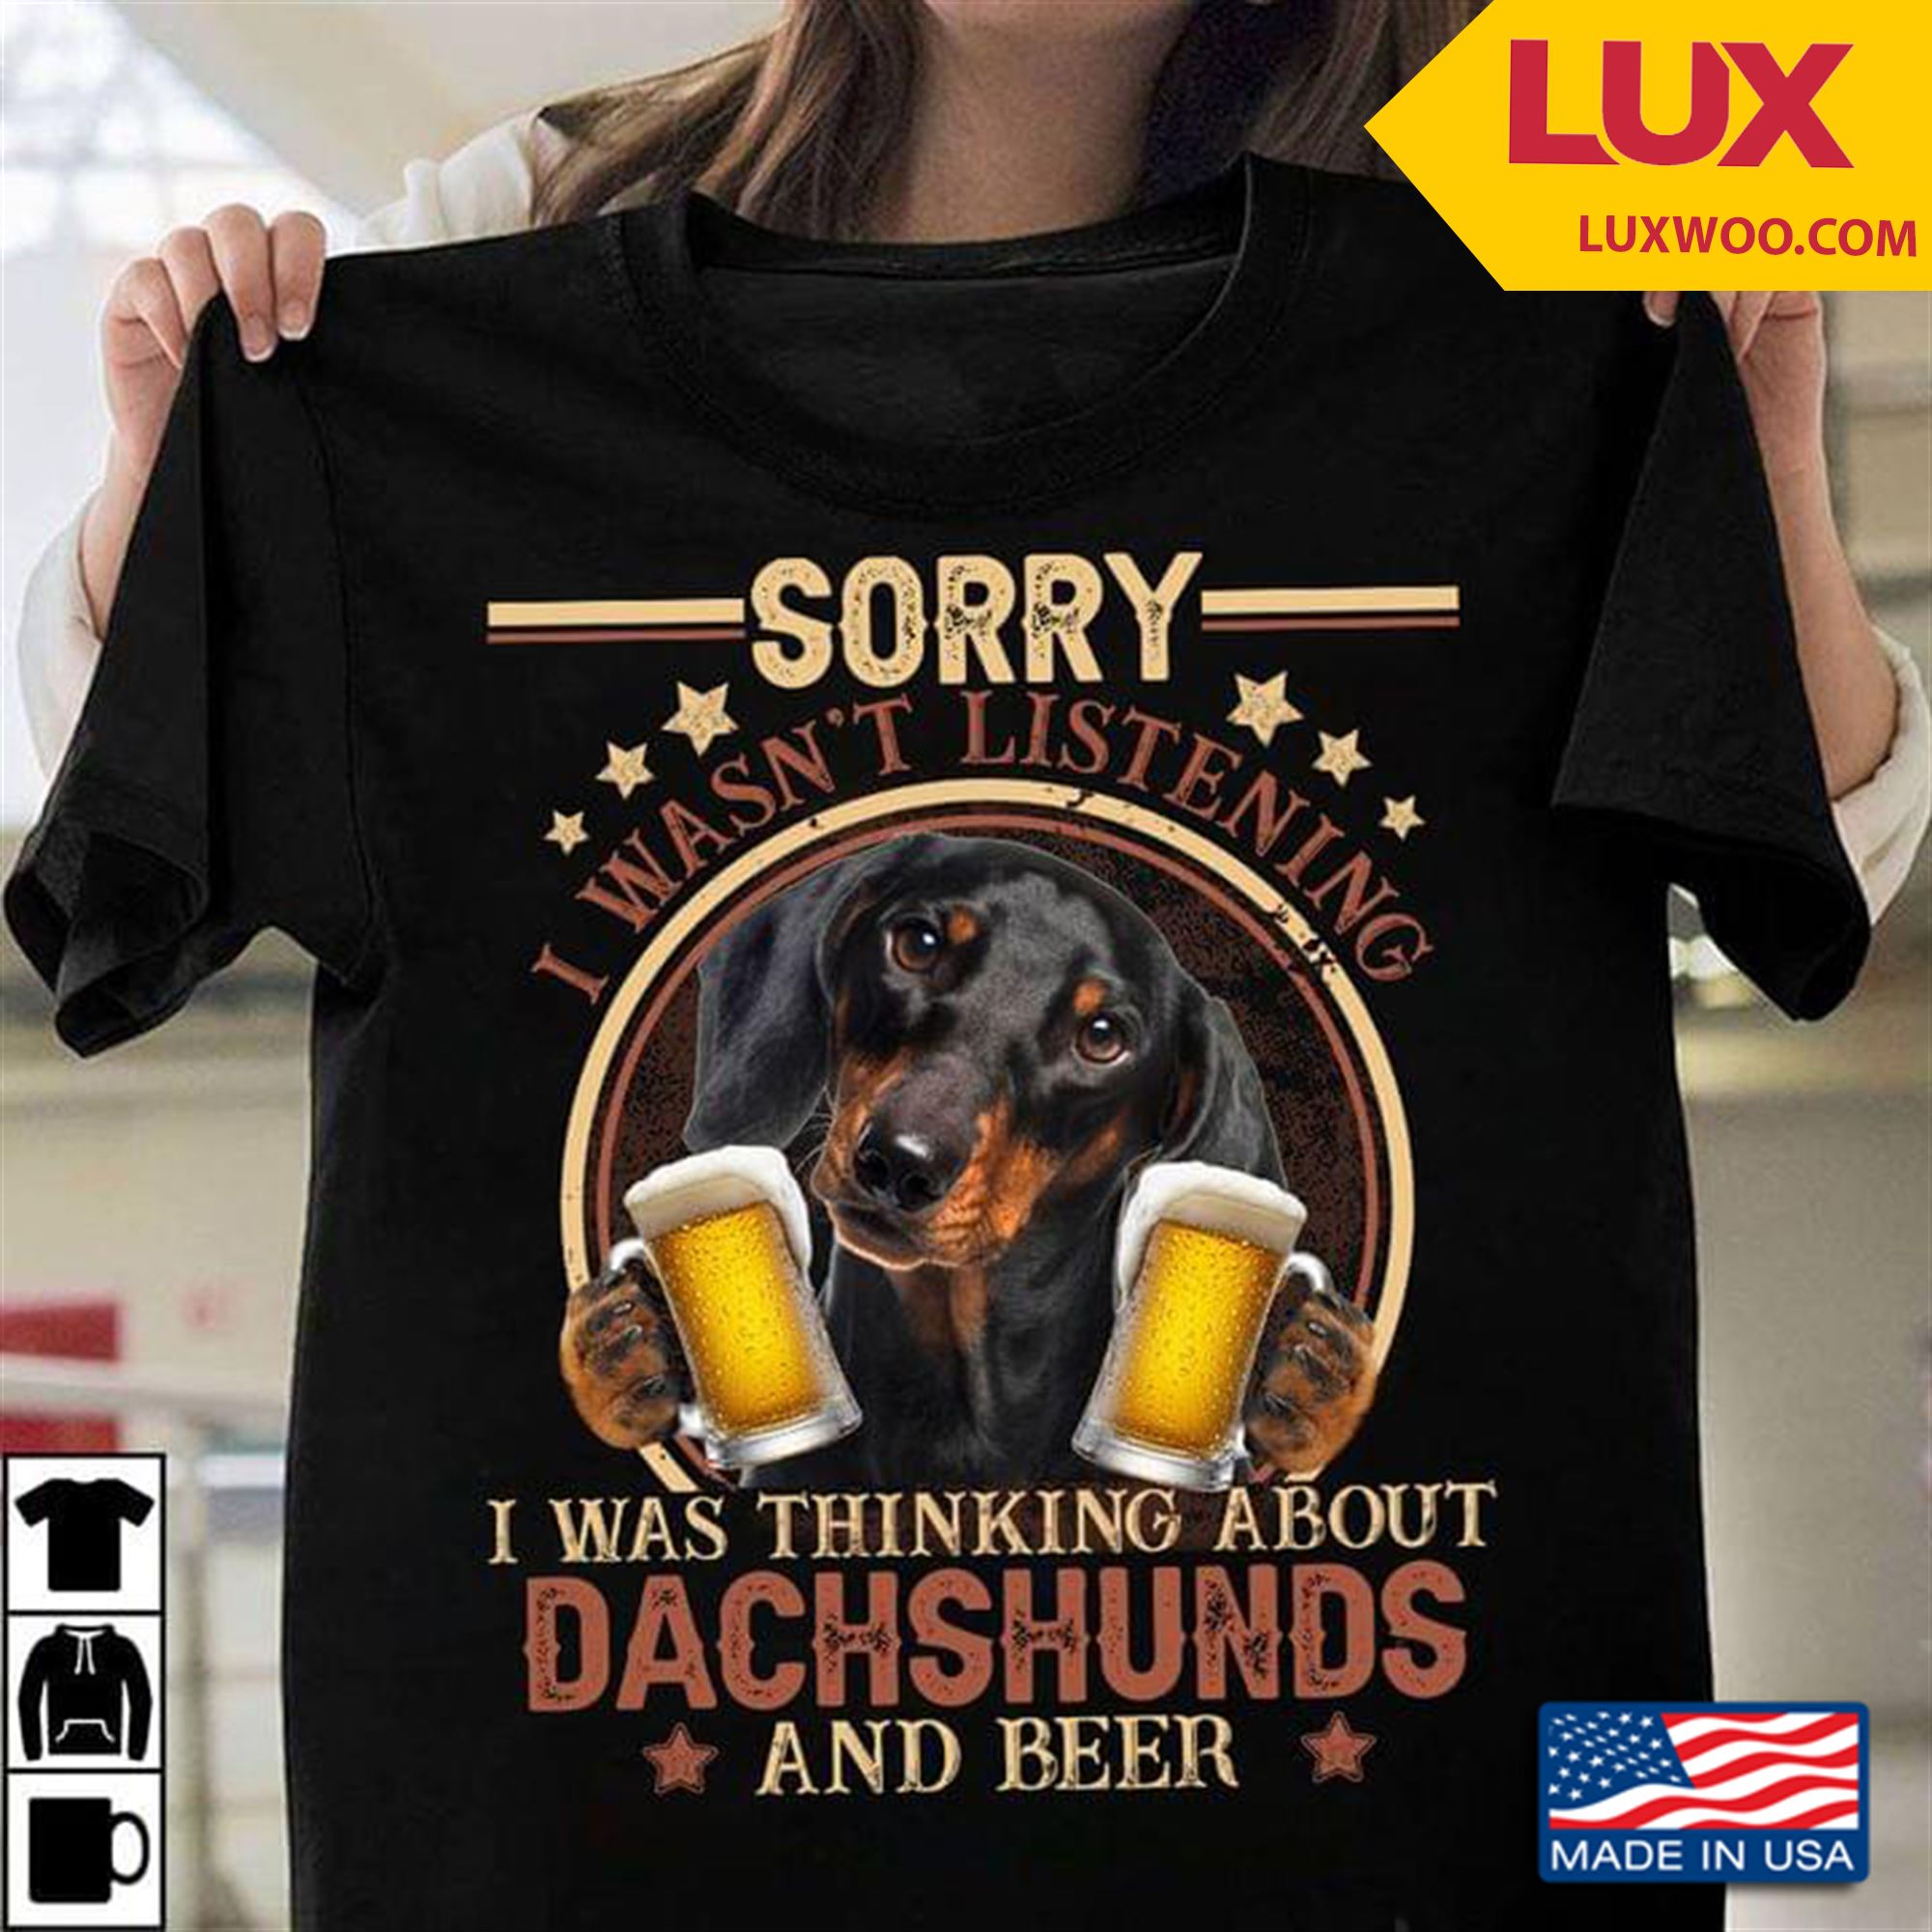 Sorry I Wasnt Listening I Was Thinking About Dachshunds And Beer Shirt Size Up To 5xl